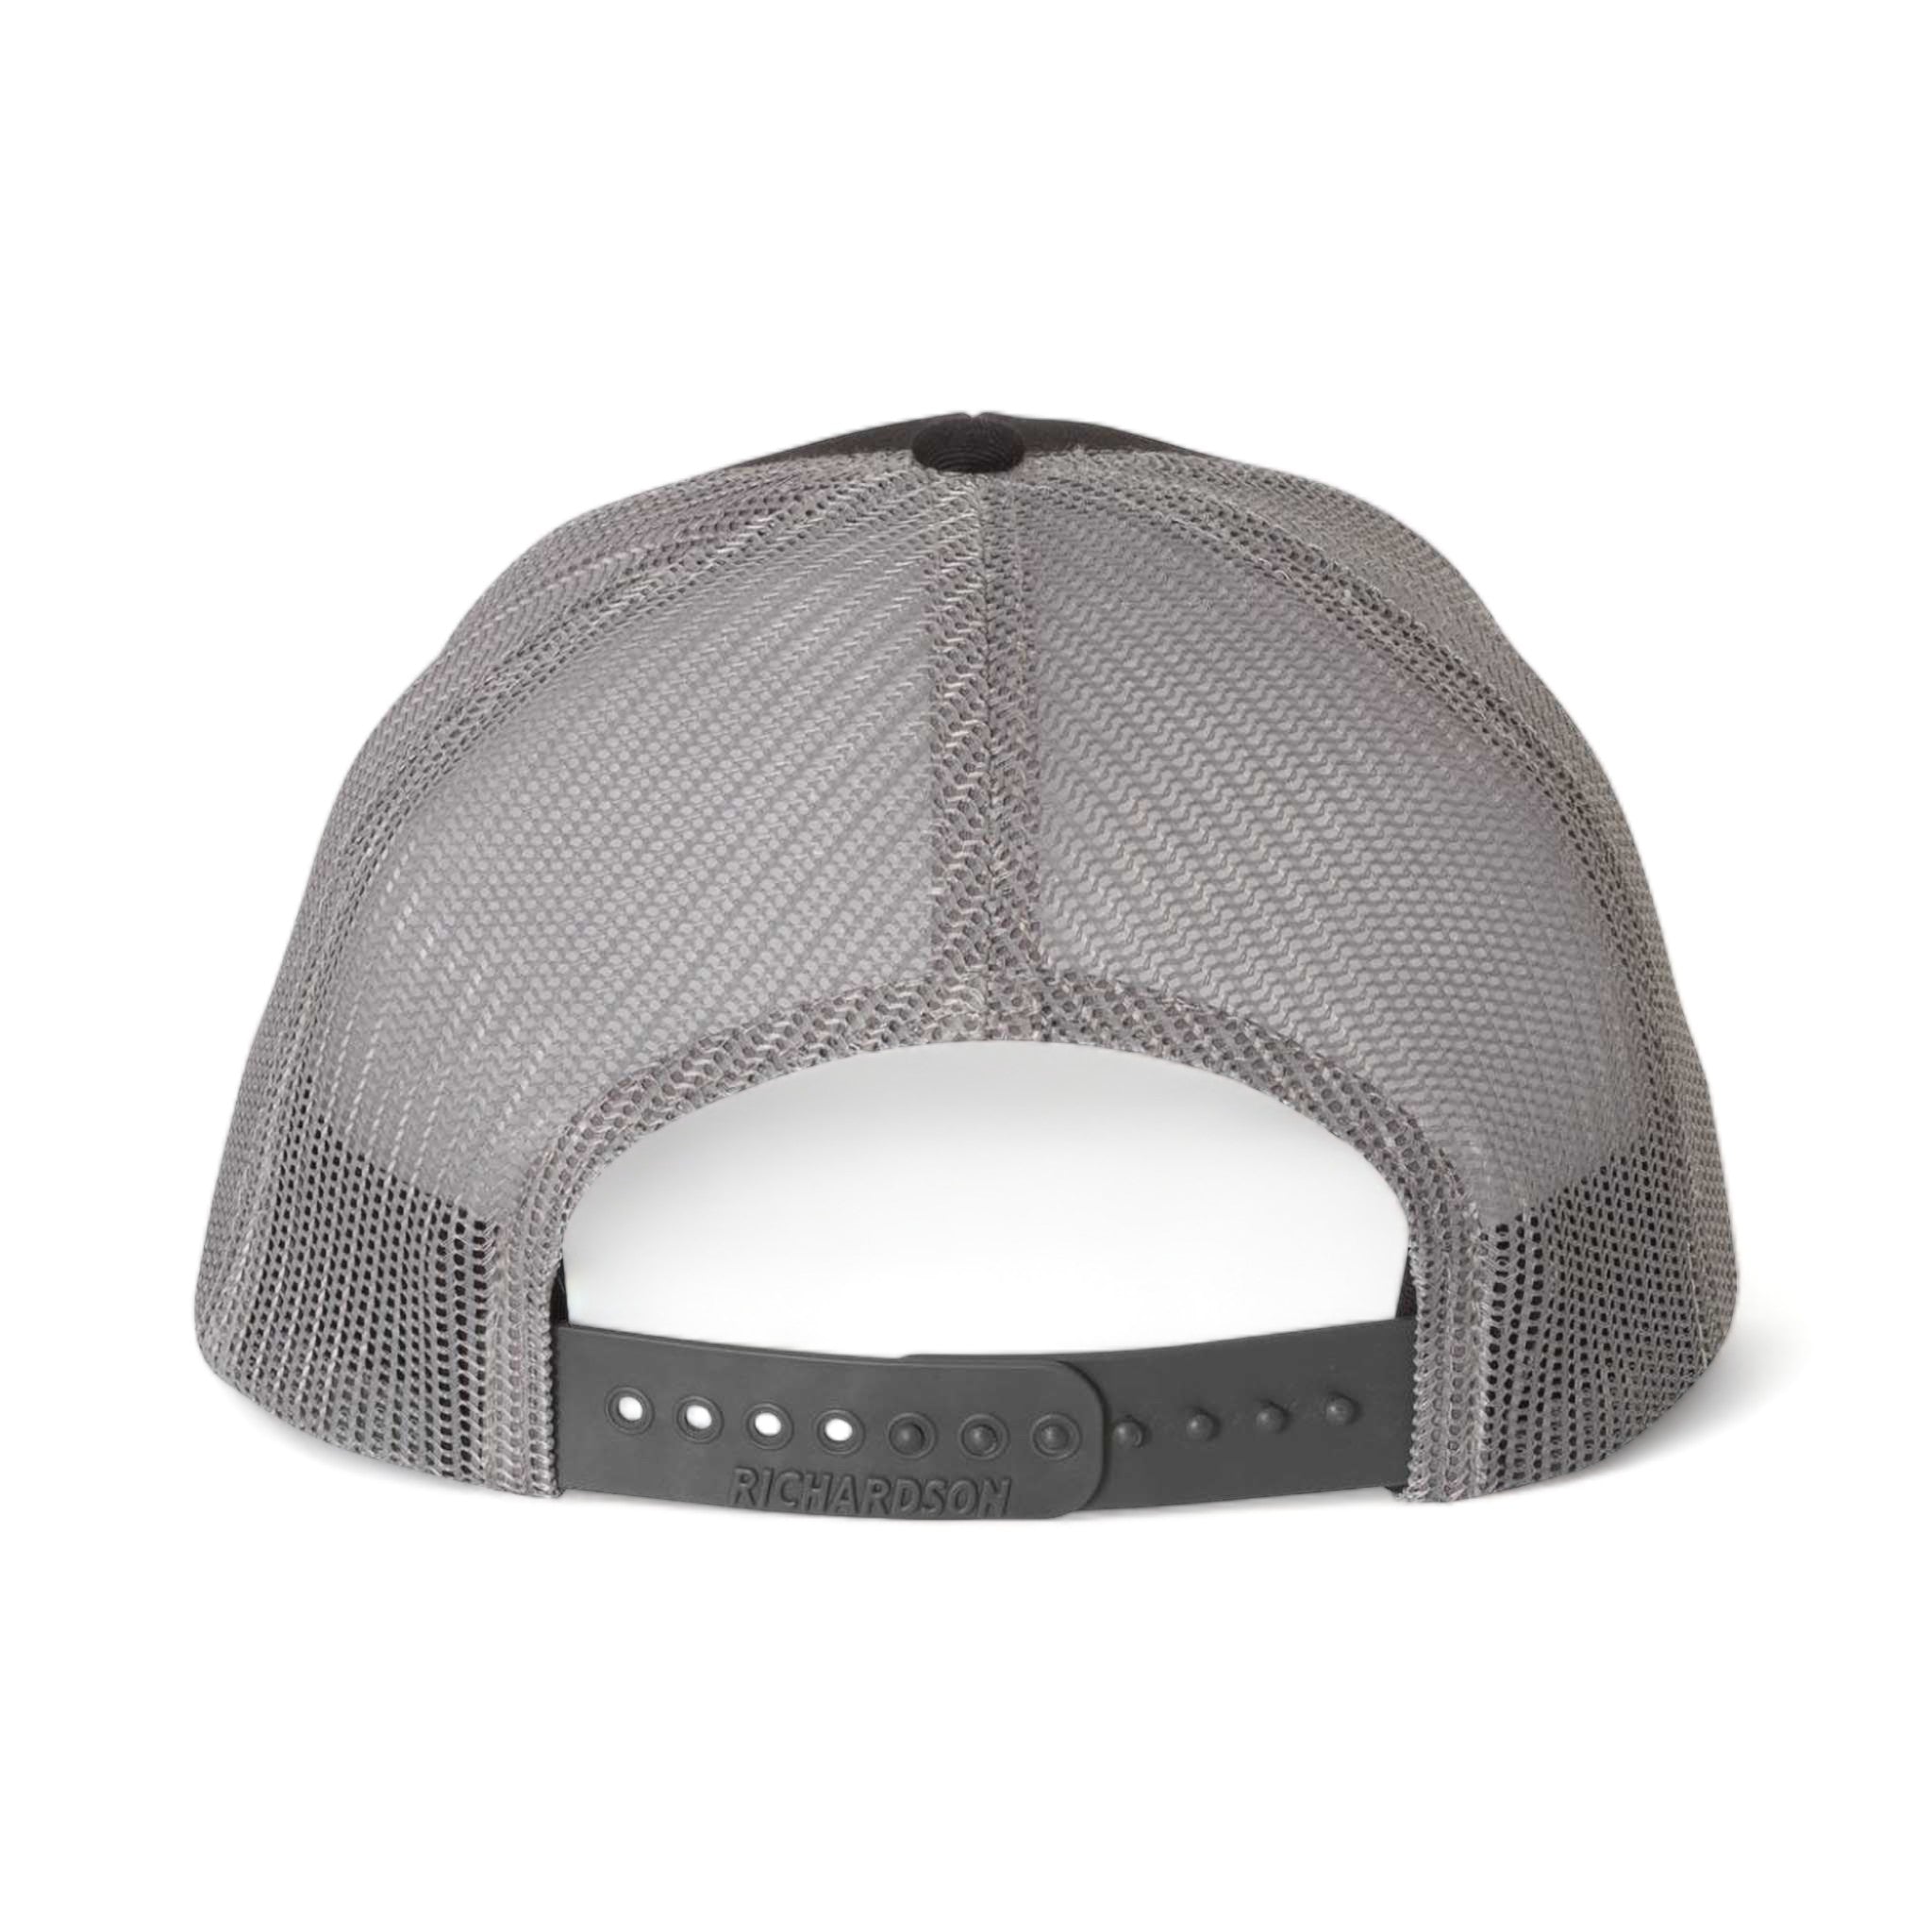 Back view of Richardson 112 custom hat in black and charcoal